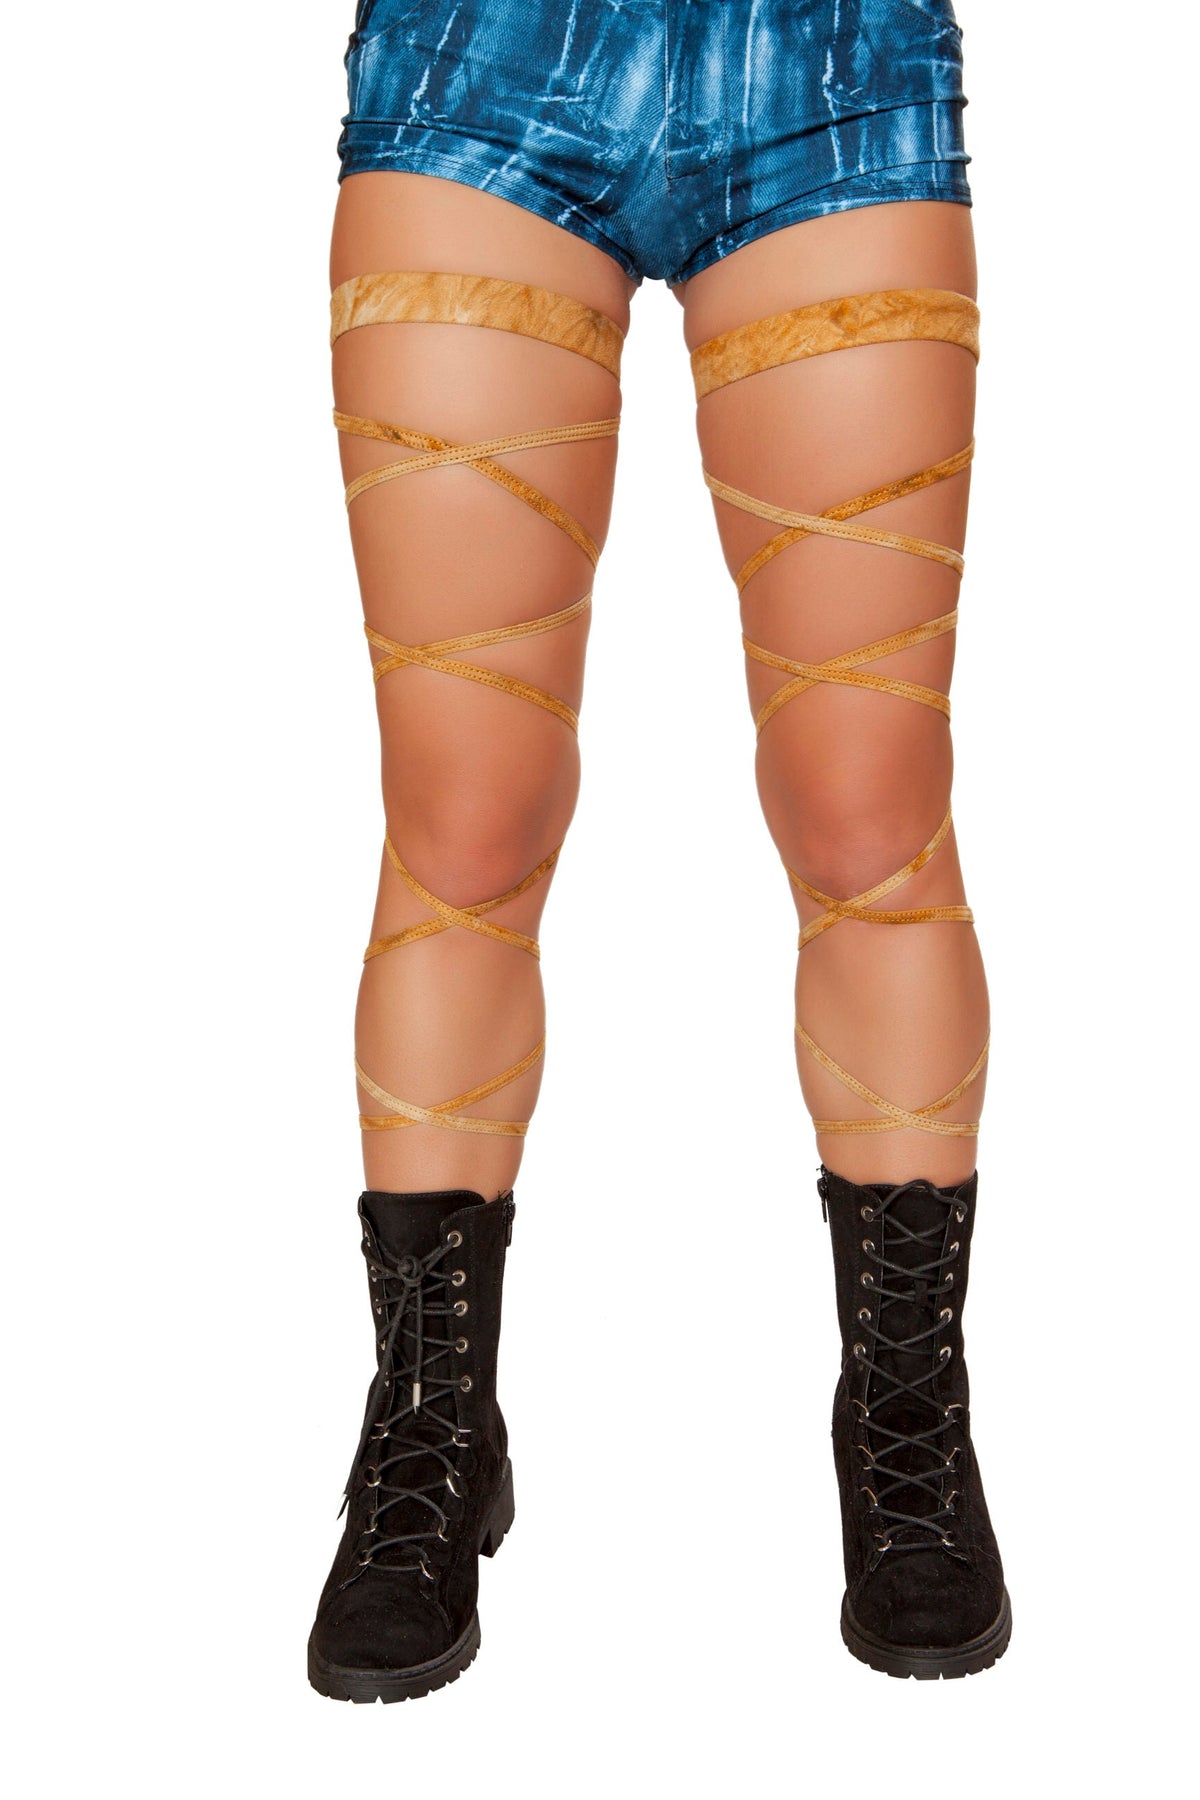 Rave & Festival Wear - Suede Leg Strap with Attached Garter-Roma Costume